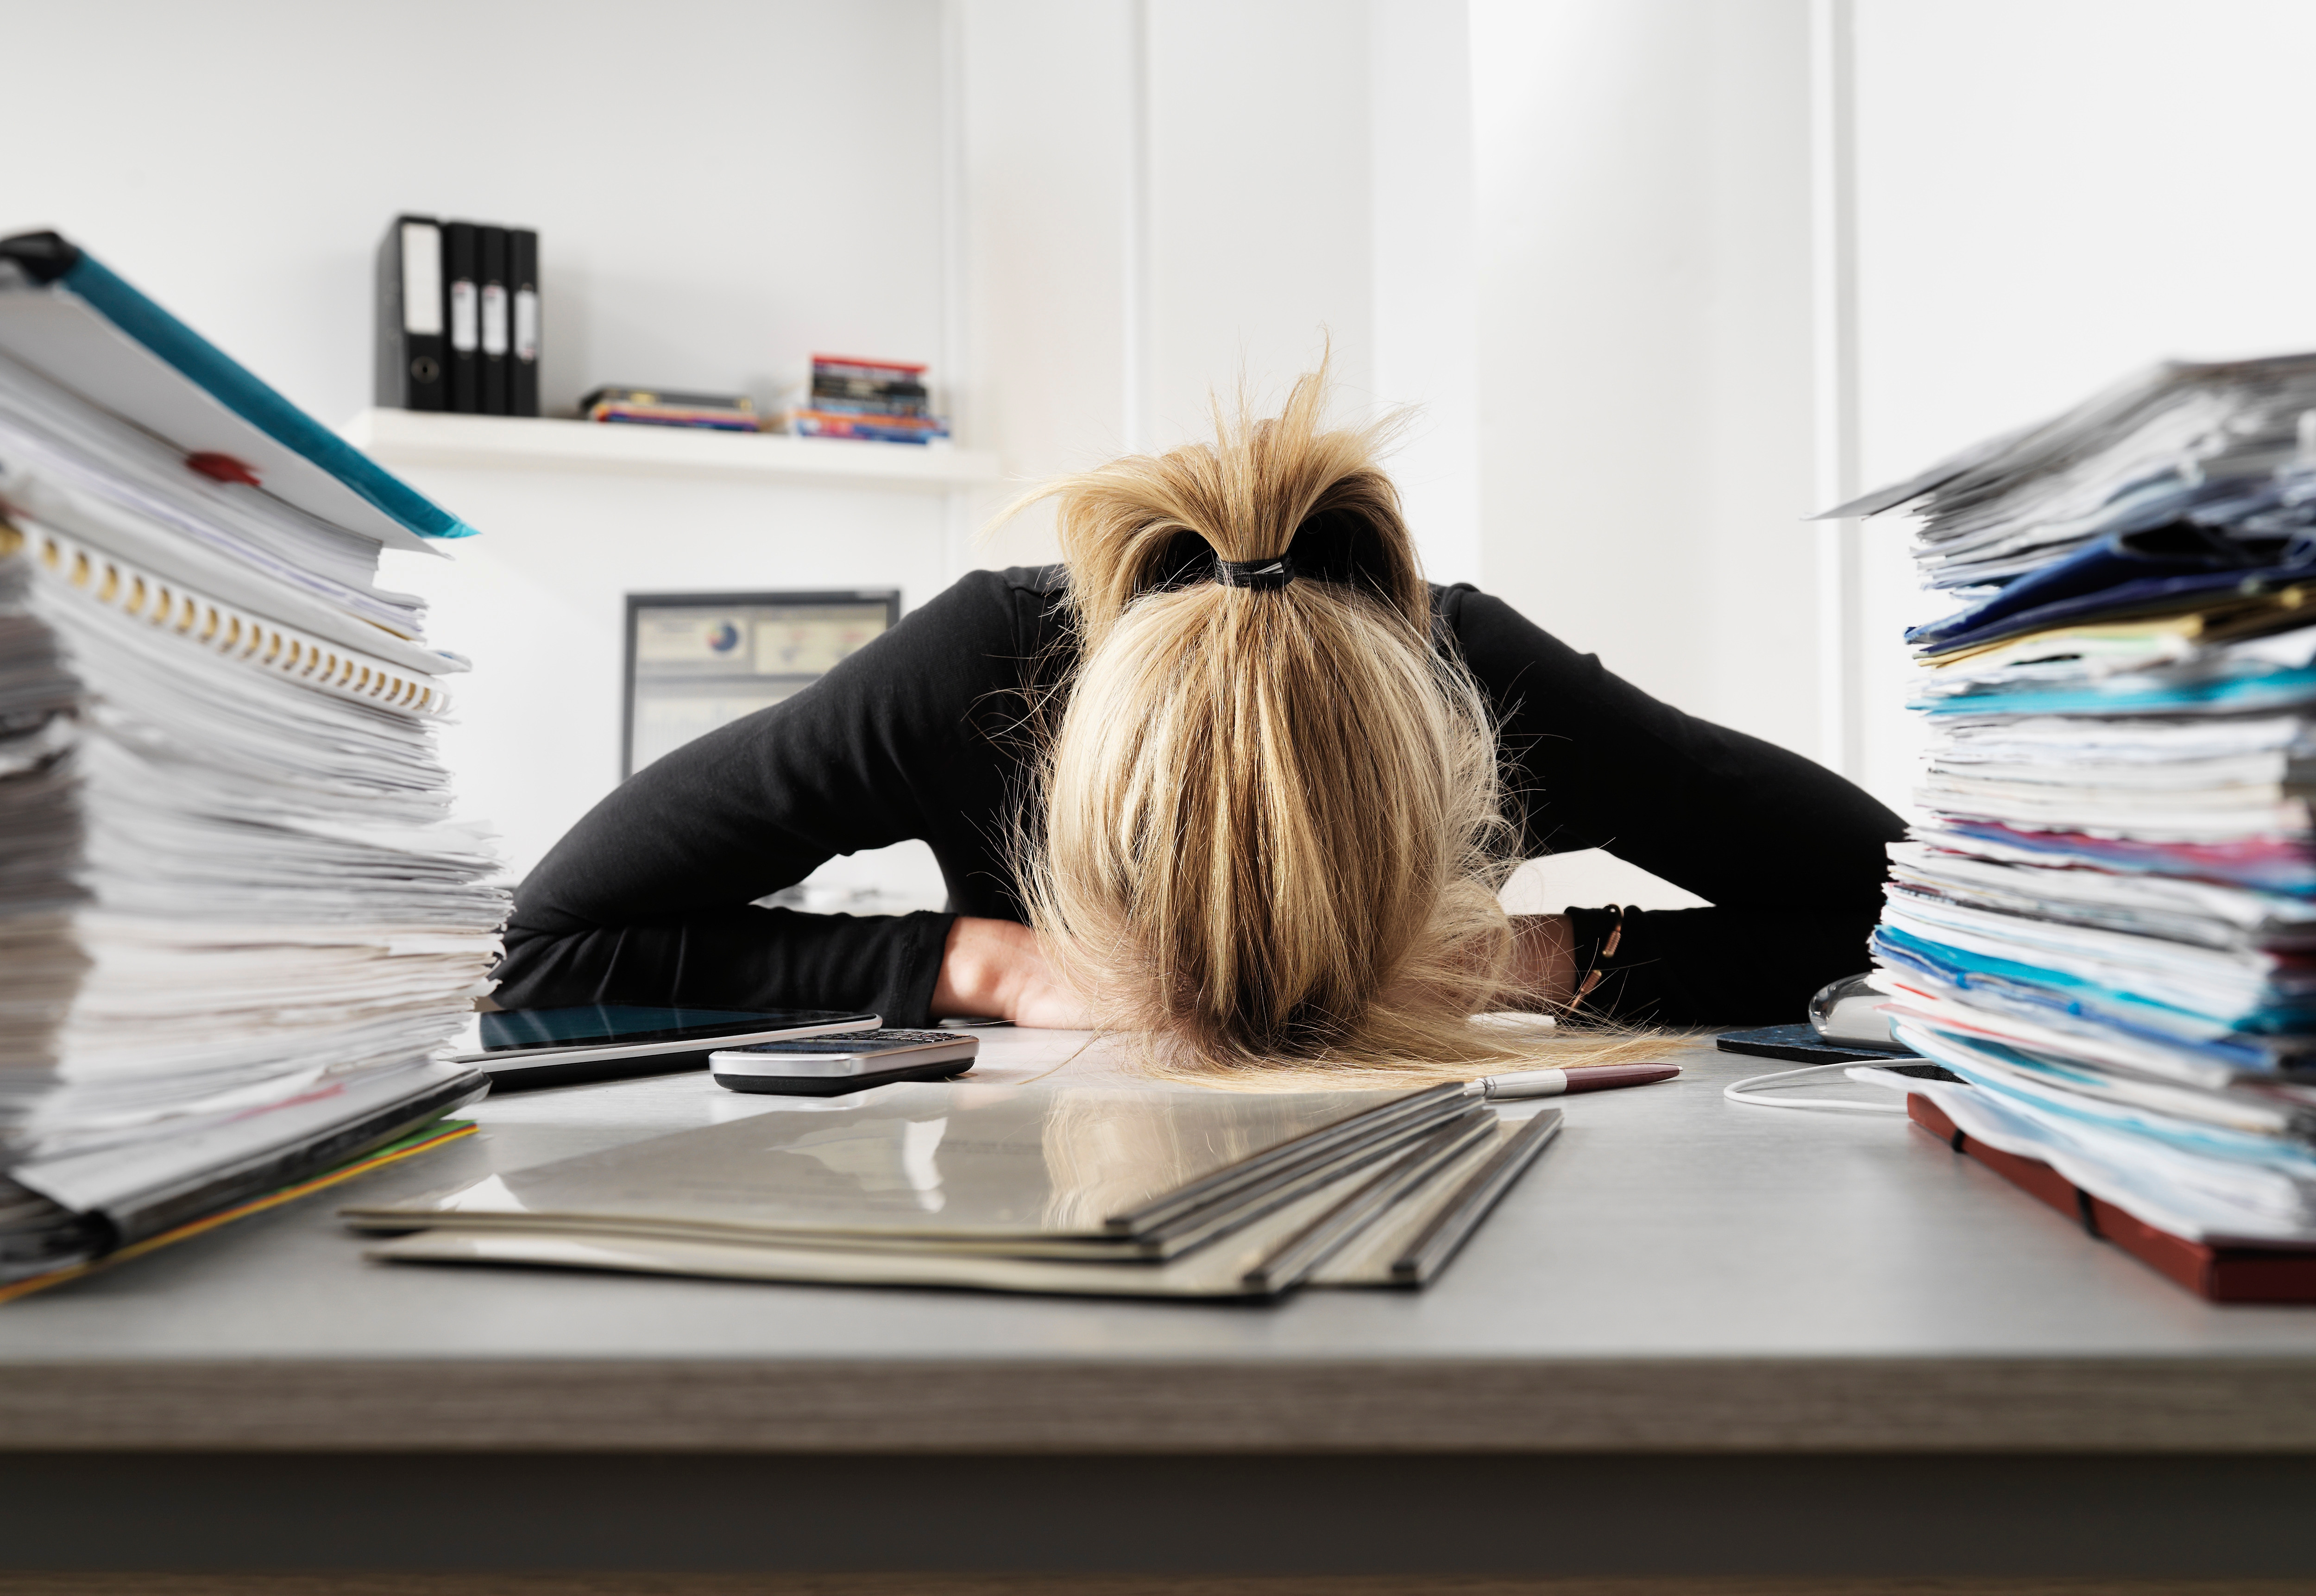 7 Signs You're Burned Out at Work